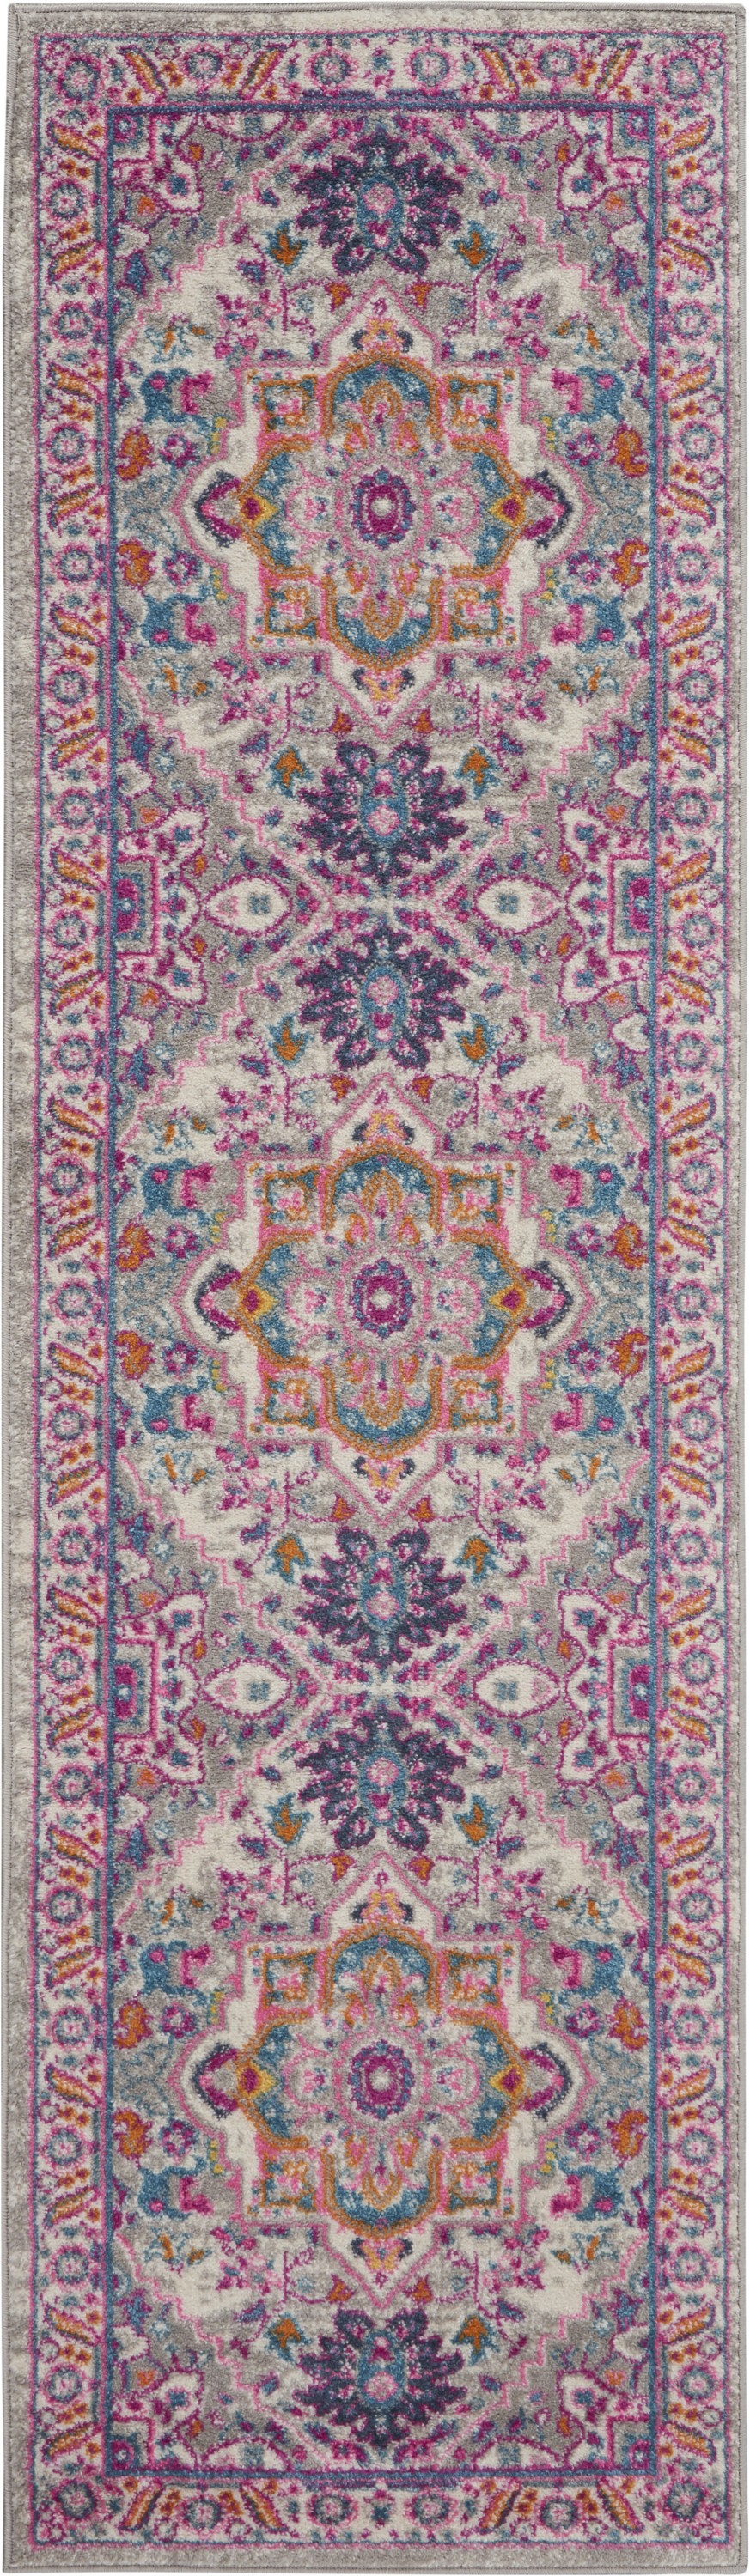 8' Pink And Gray Power Loom Runner Rug-385494-1